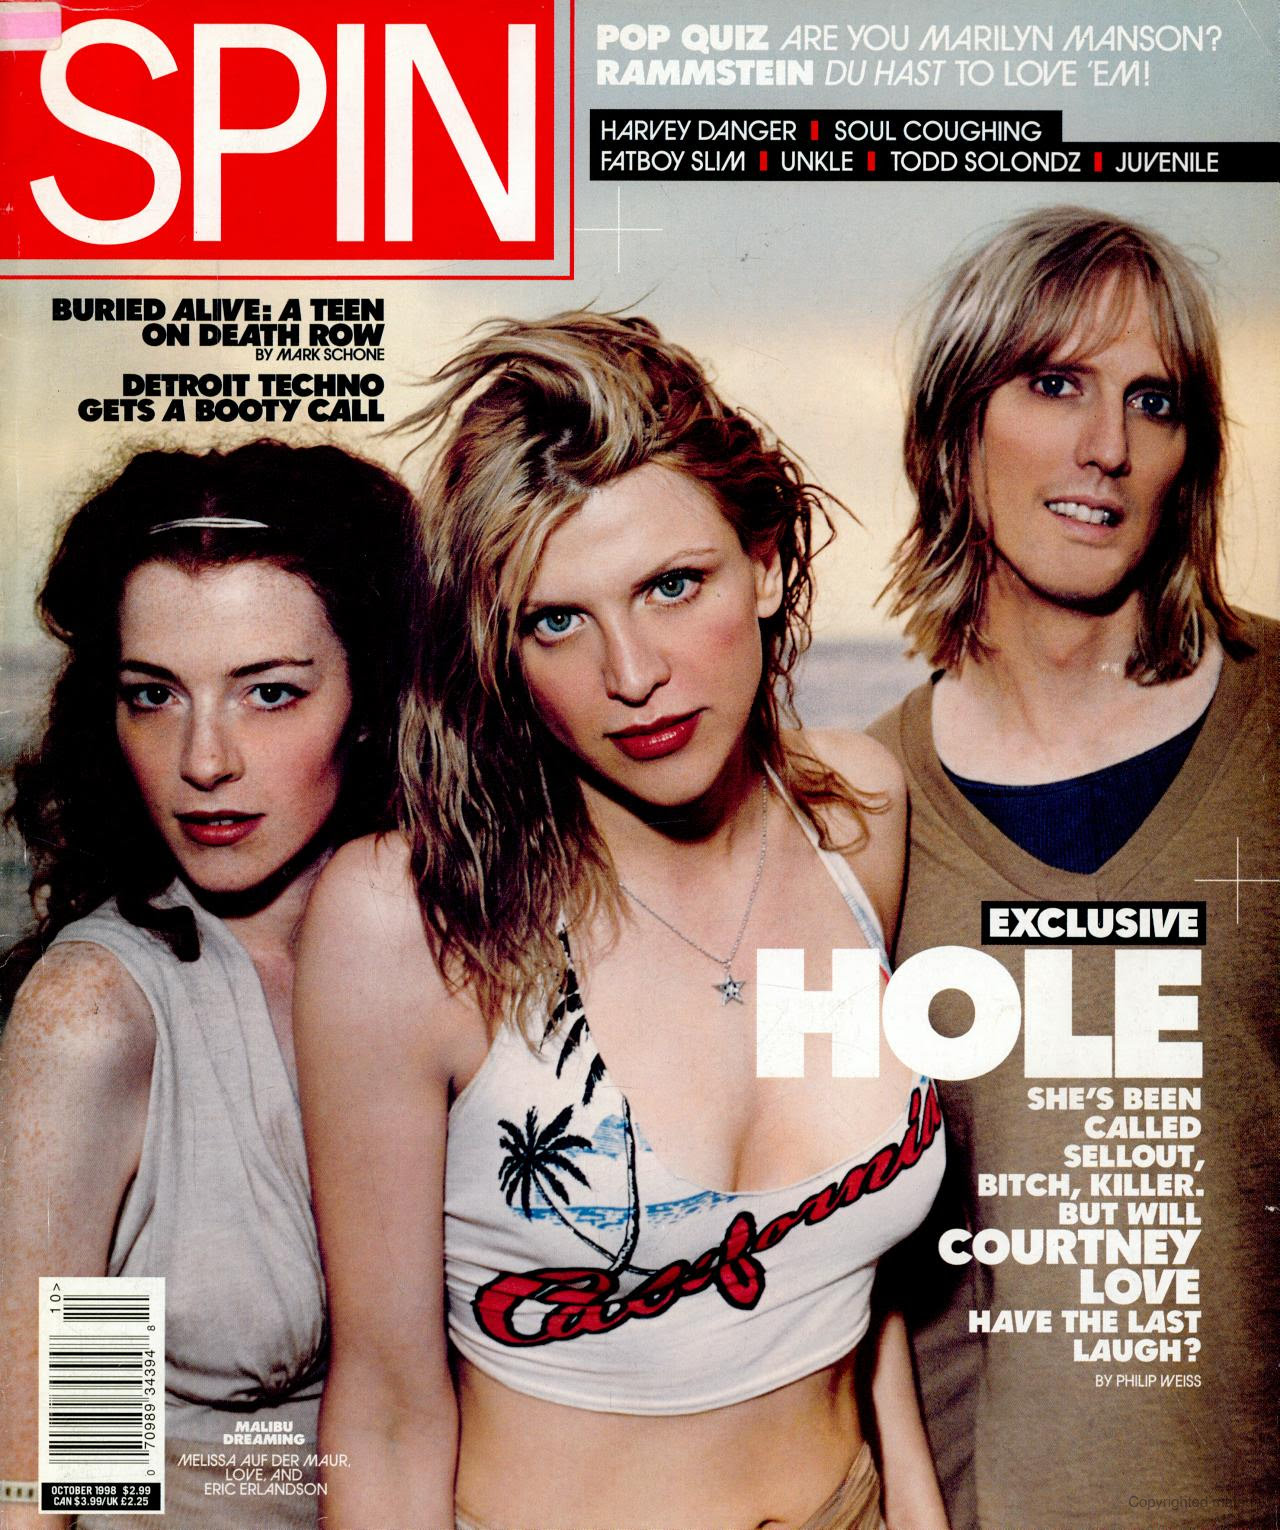 Cover Spin Oct 1998